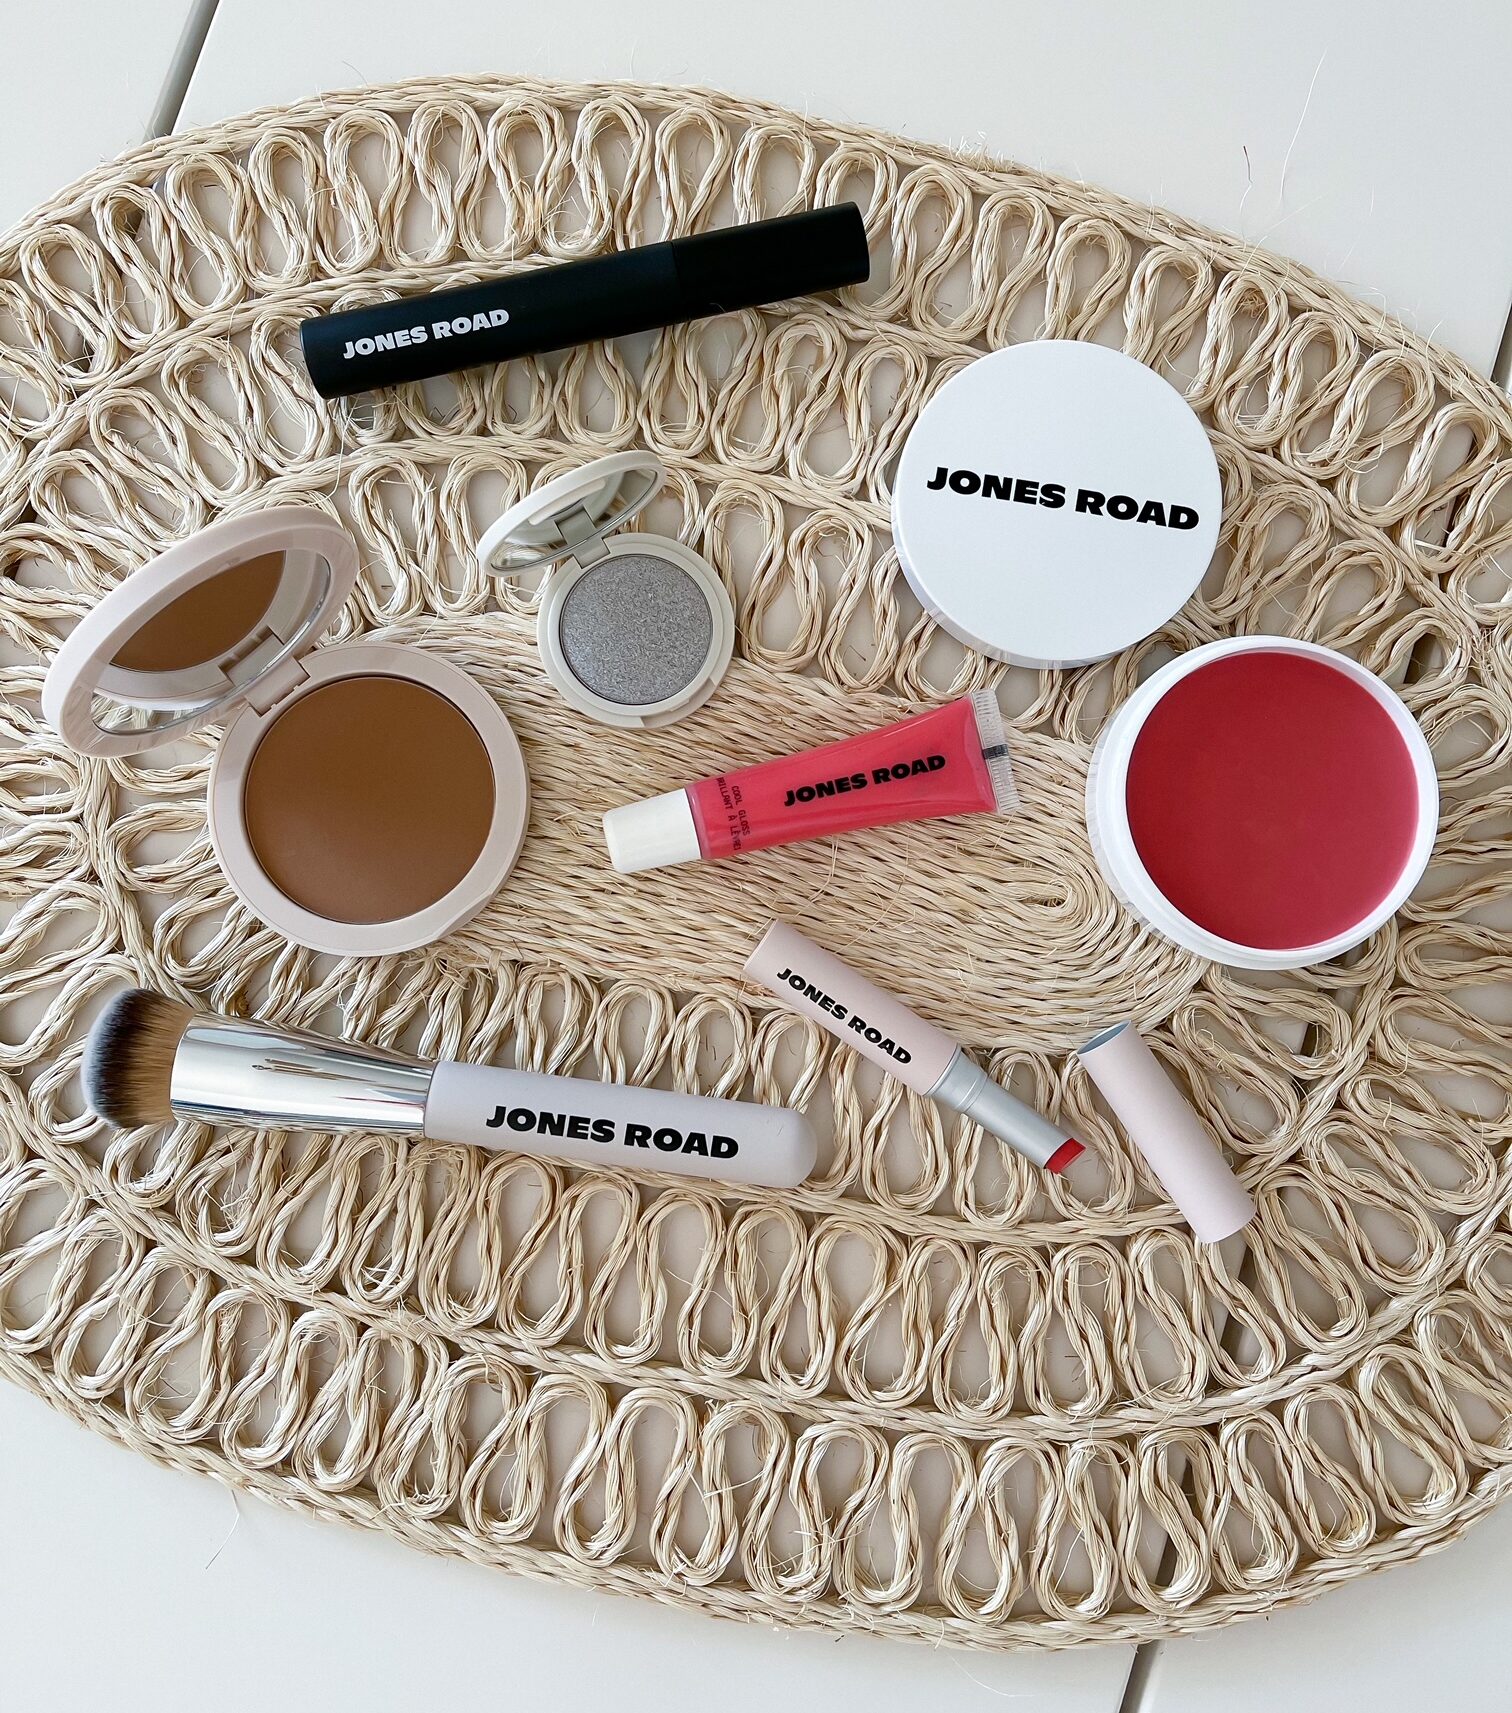 Looking for a new makeup brand to try? Desiree Leone of Beautifully Seaside shares 5 reasons why Jones Road Beauty should be your go-to makeup brand.